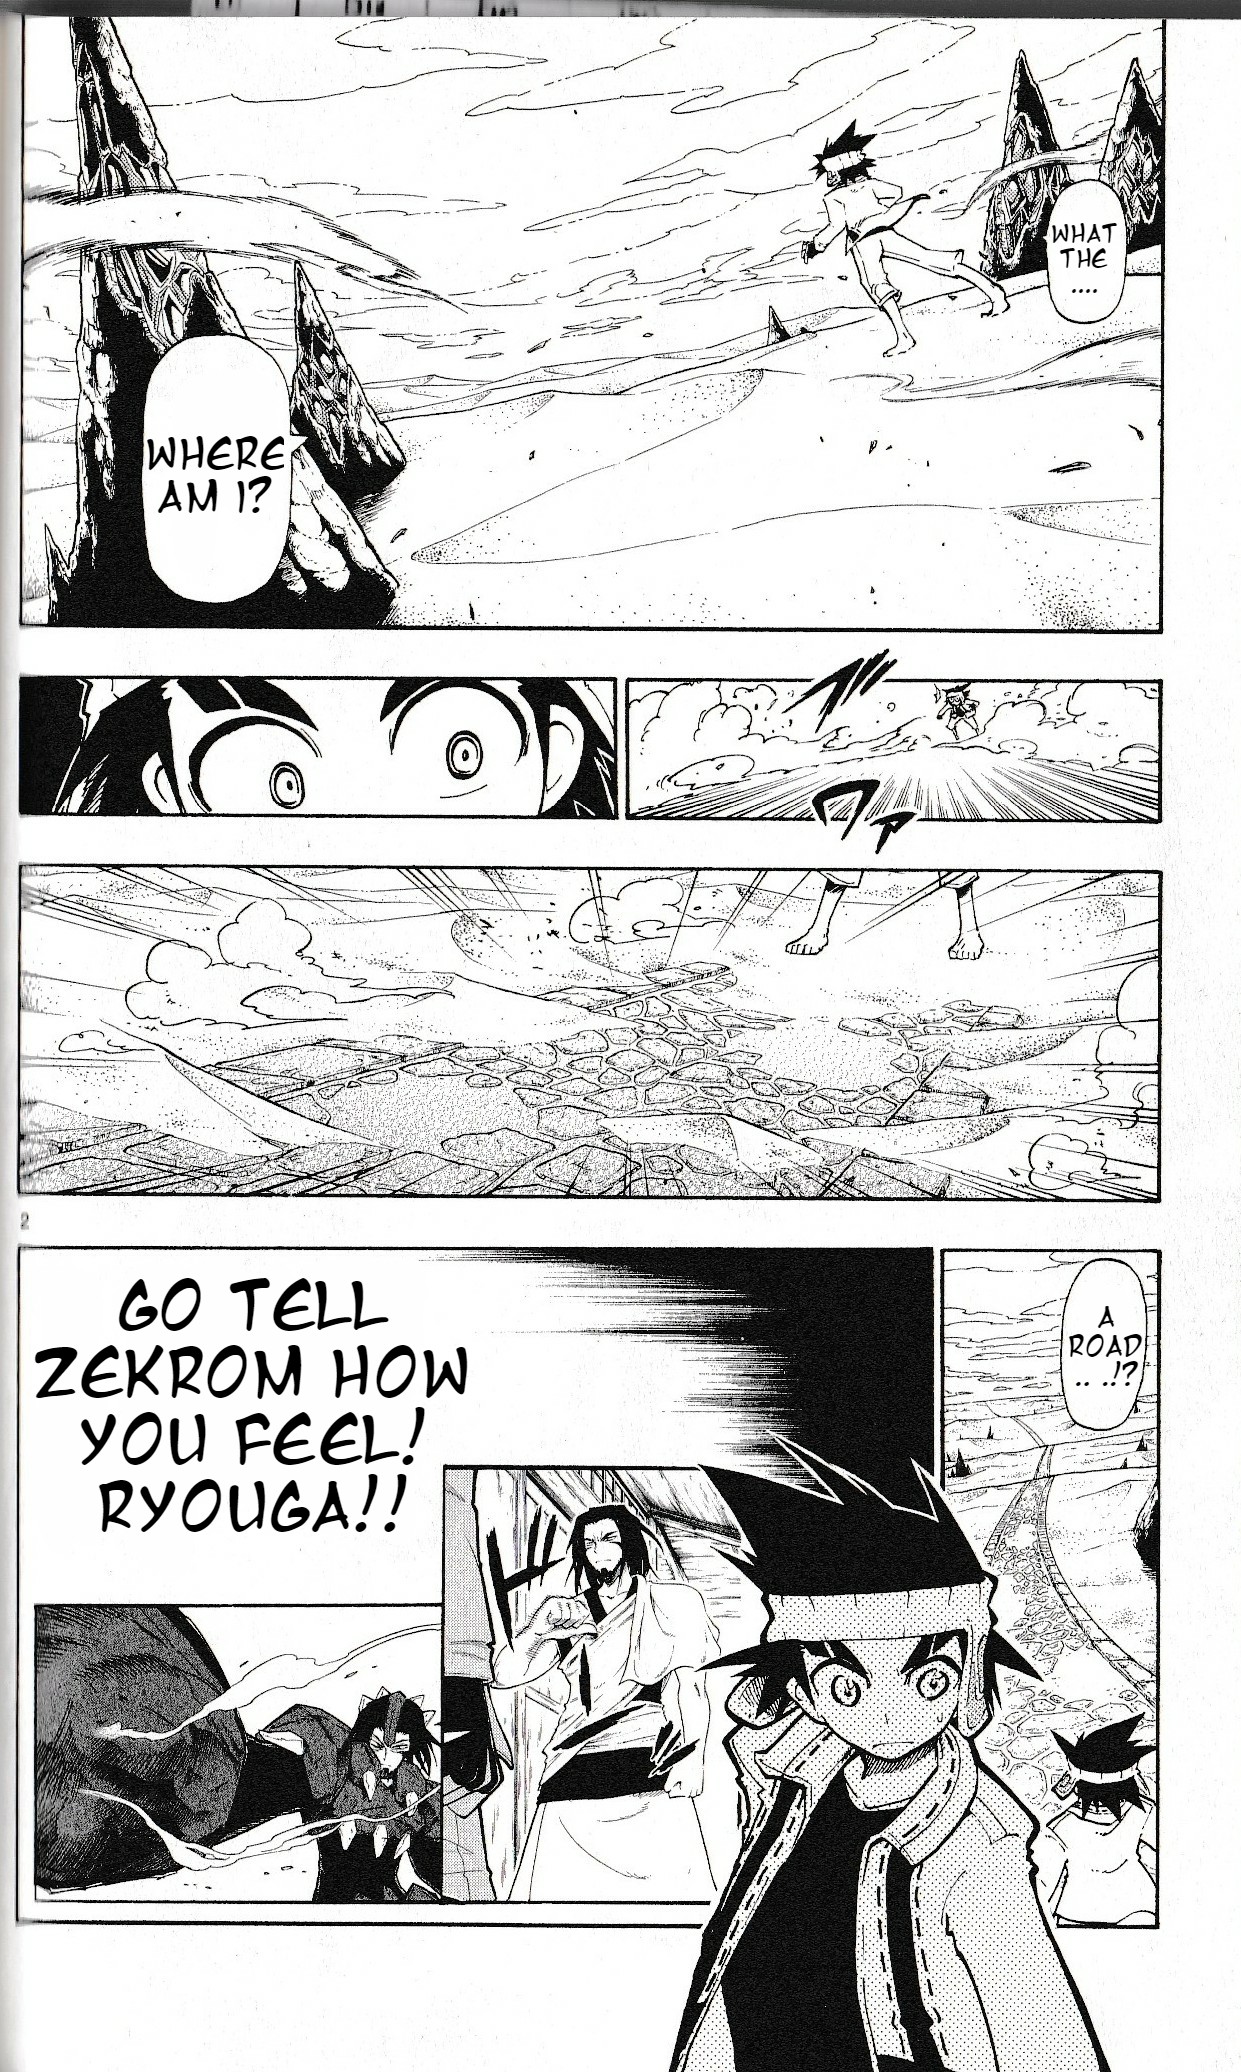 Pocket Monster Reburst Vol.2 Chapter 16: The Road To Zekrom - Picture 2